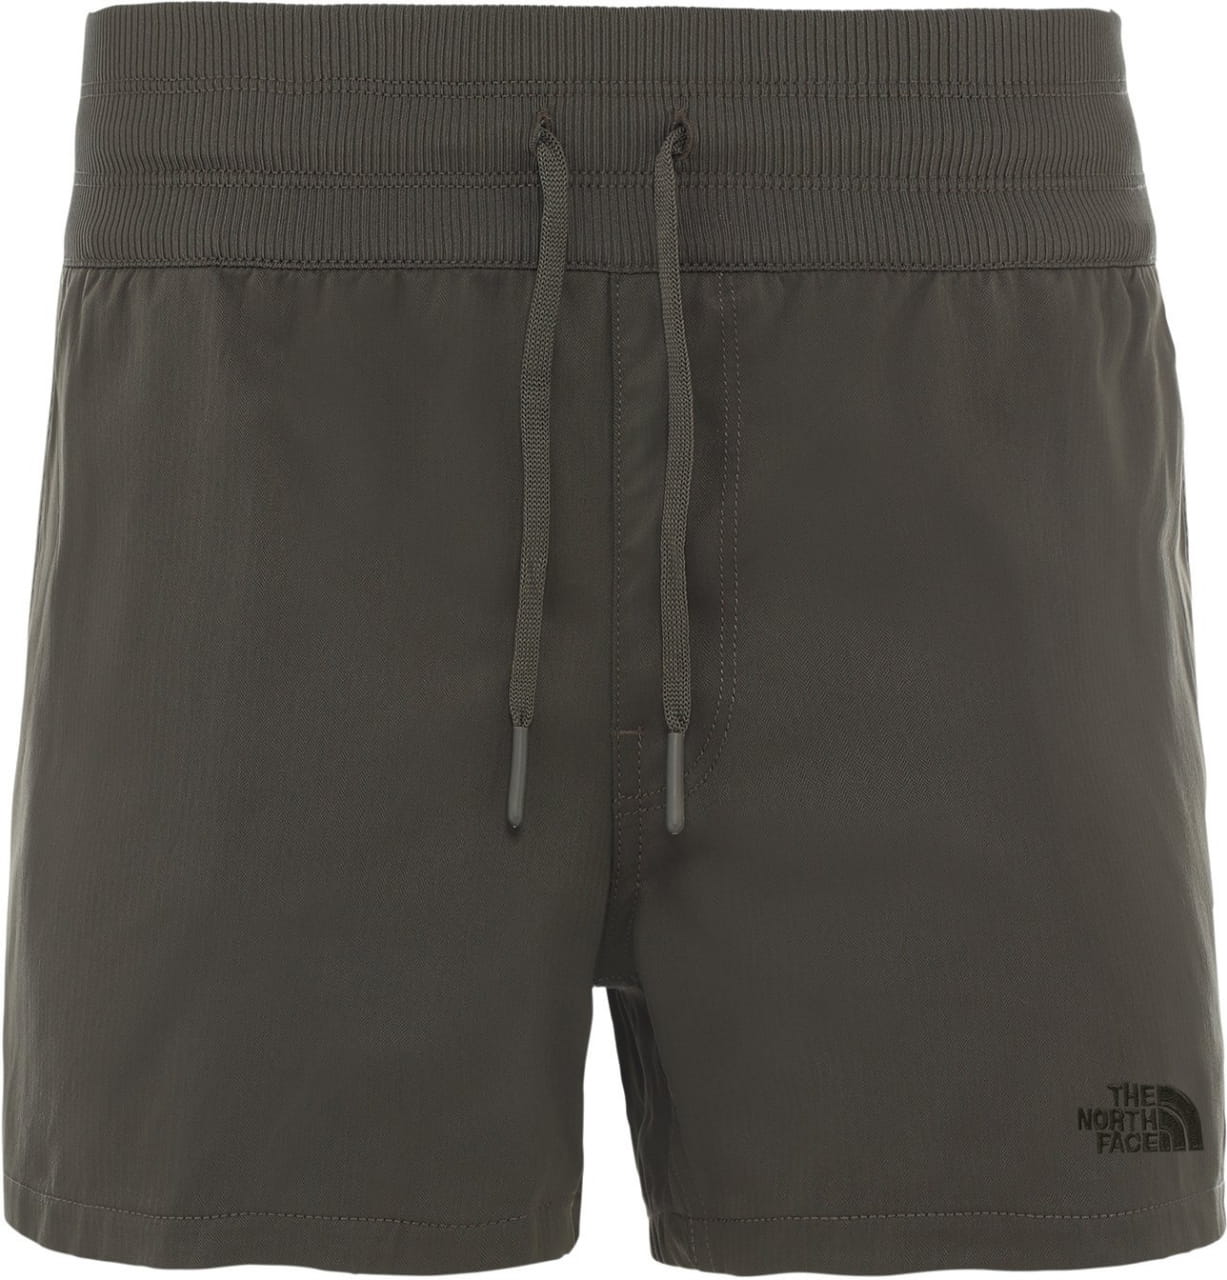 Shorts The North Face Women's Aphrodite Shorts